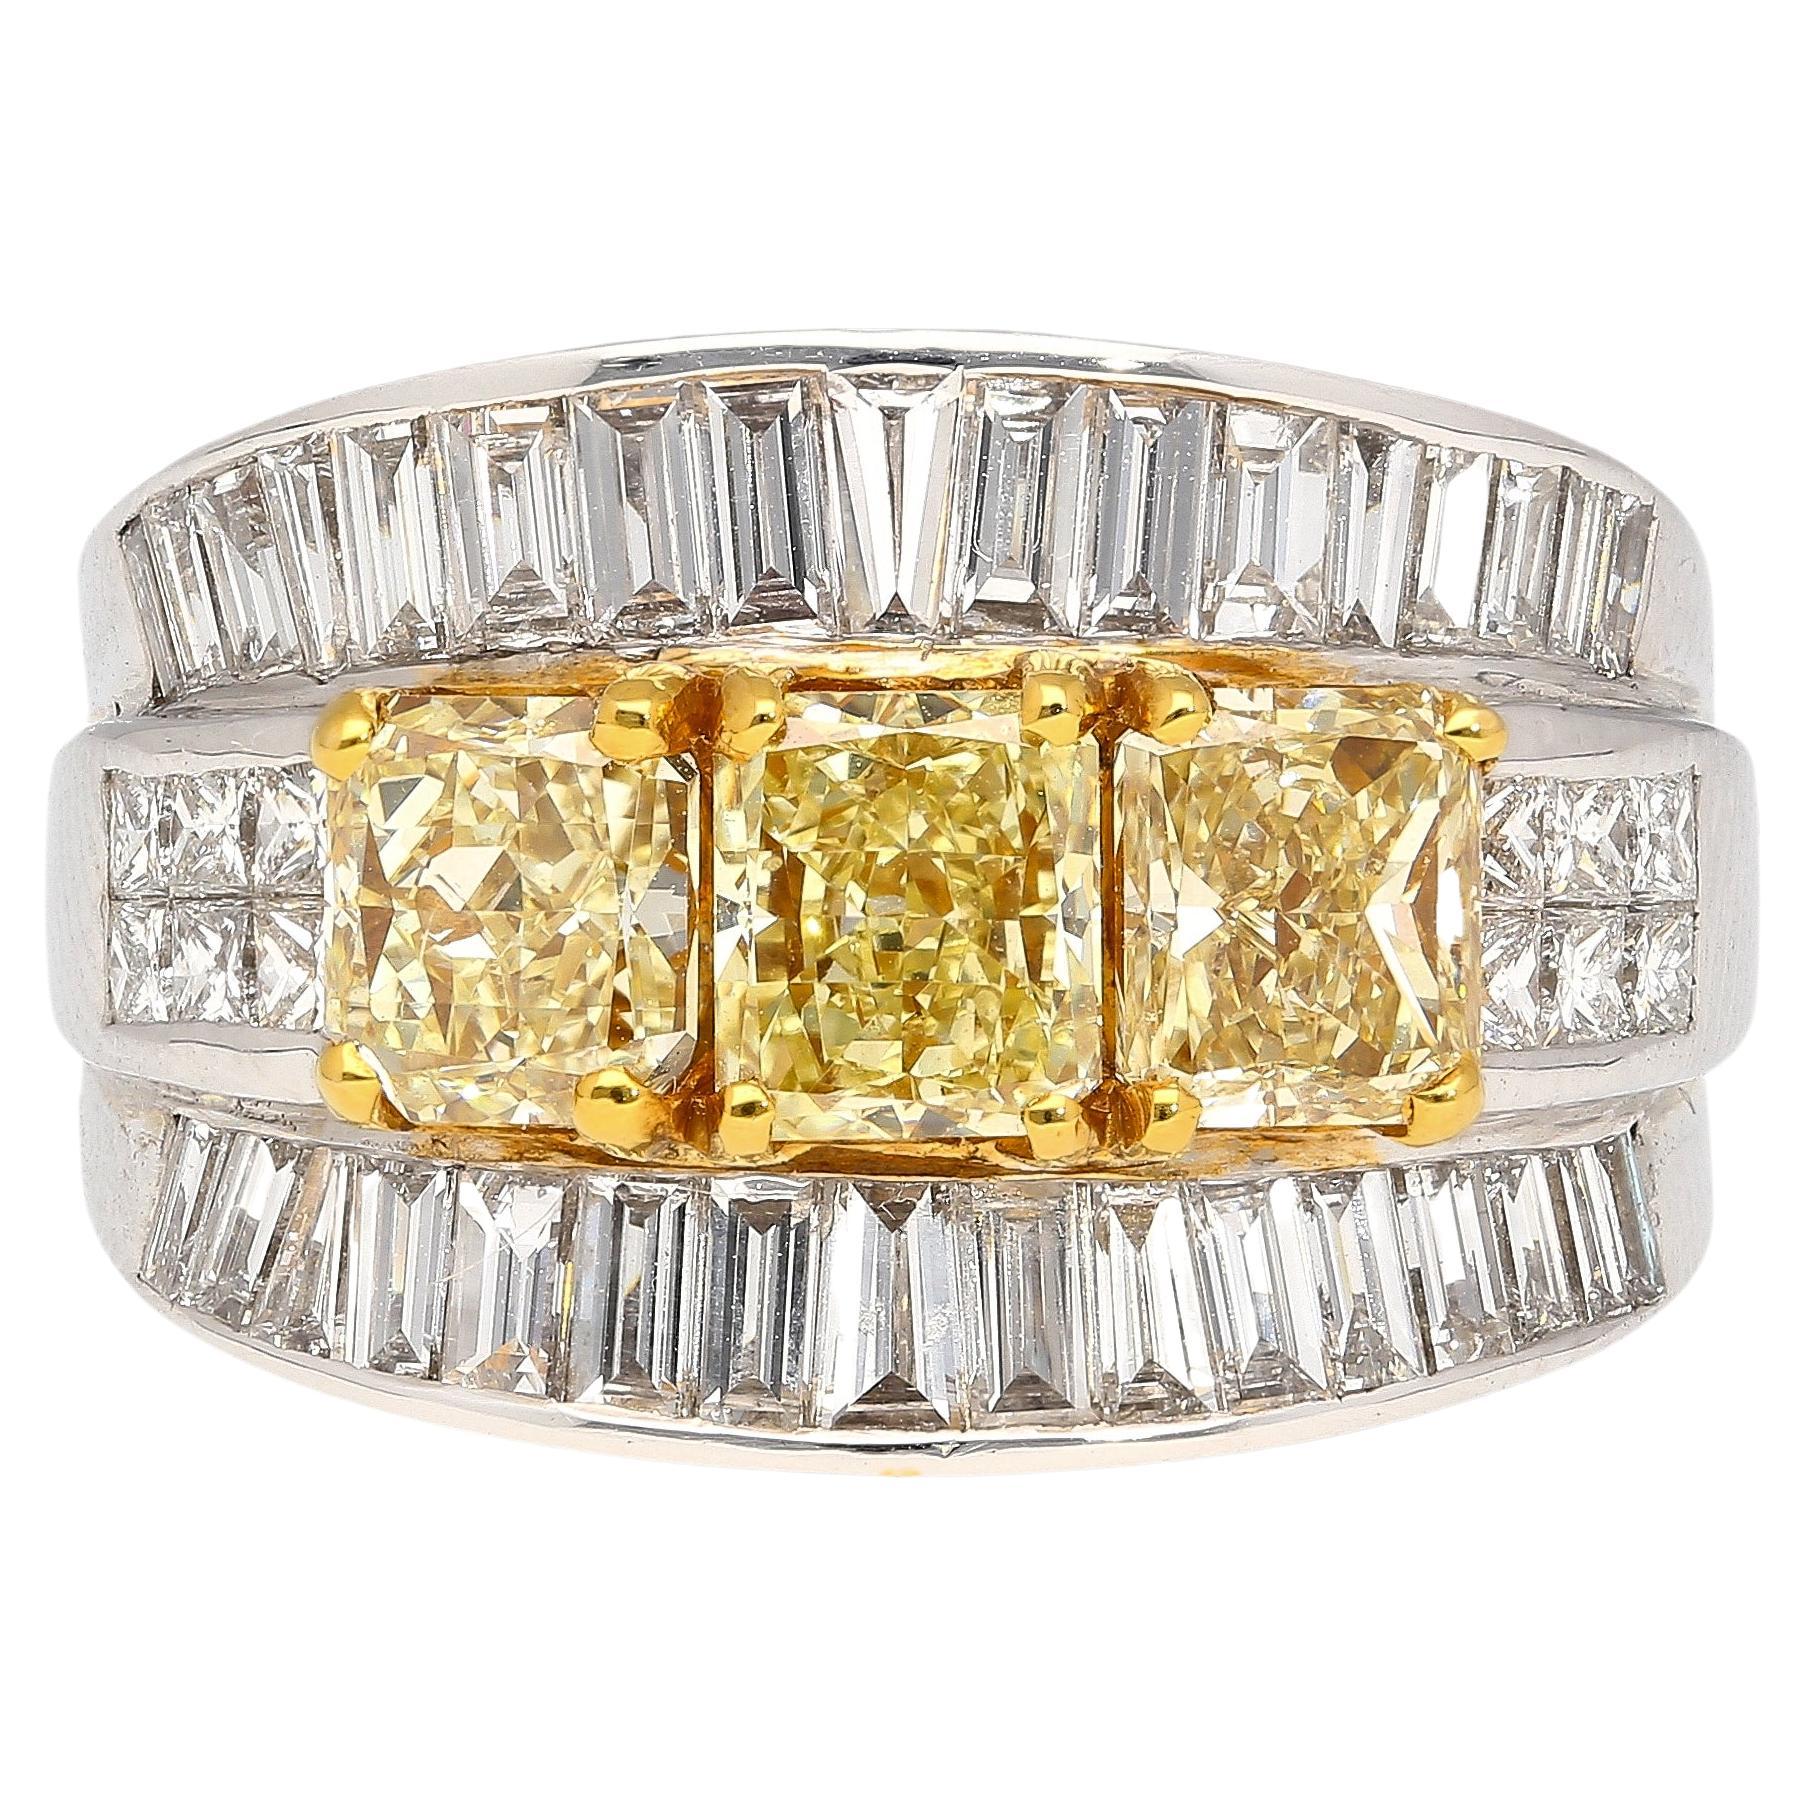 3.28 Carat Radiant Cut Fancy Yellow Diamond 3-Stone Ring in 18k White Gold For Sale